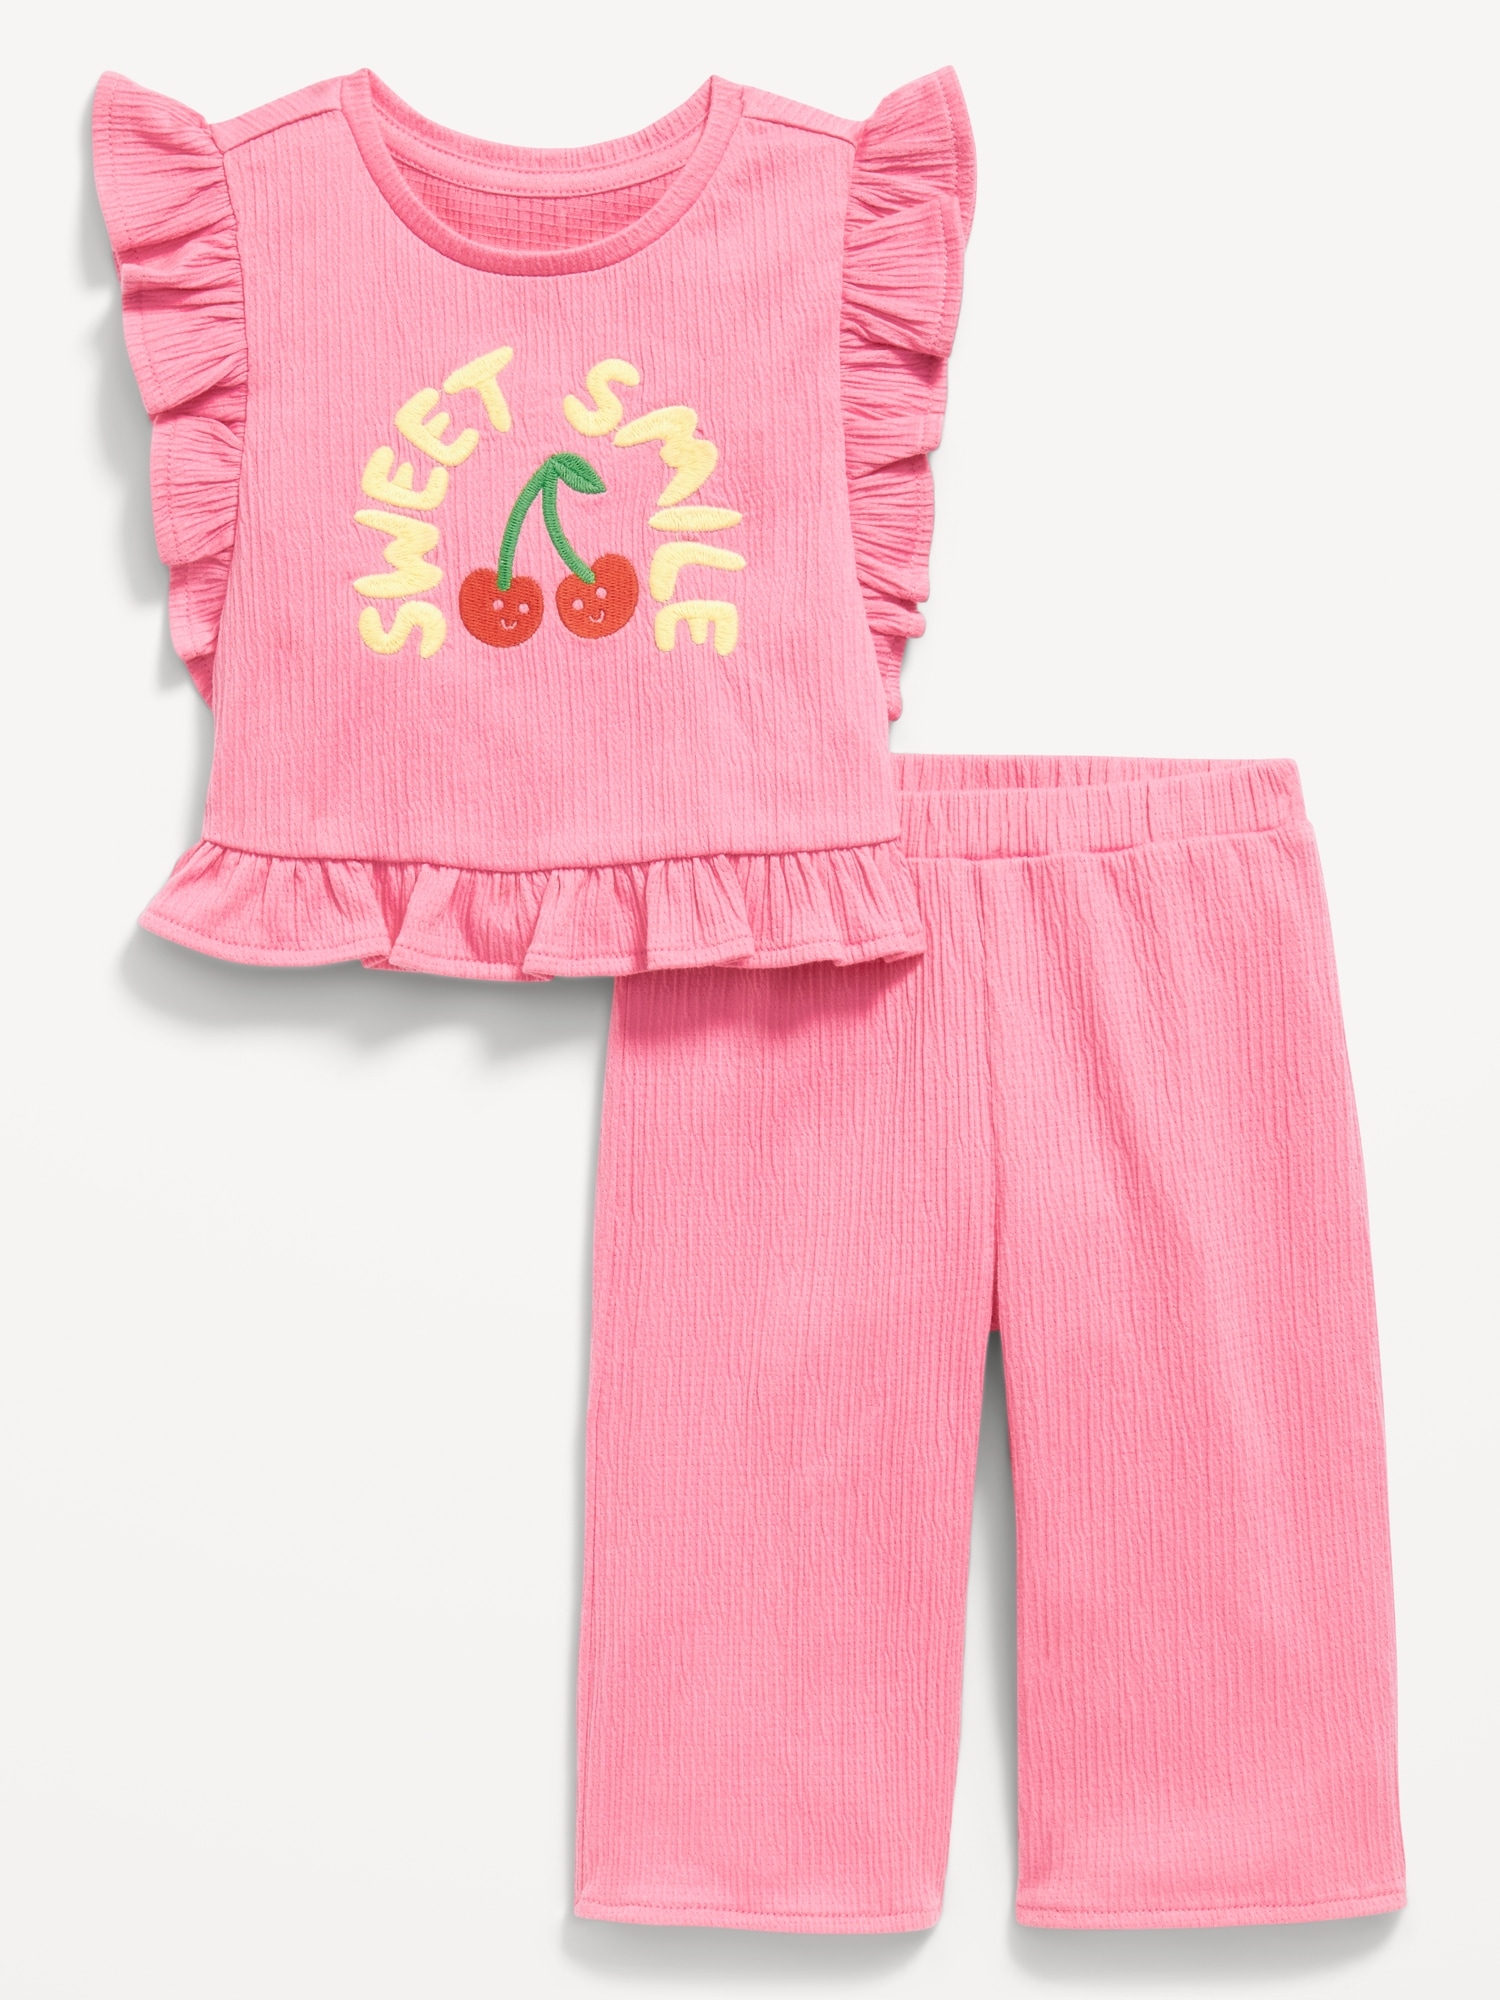 Short-Sleeve Ruffle-Trim Top and Wide-Leg Pants for Baby Hot Deal